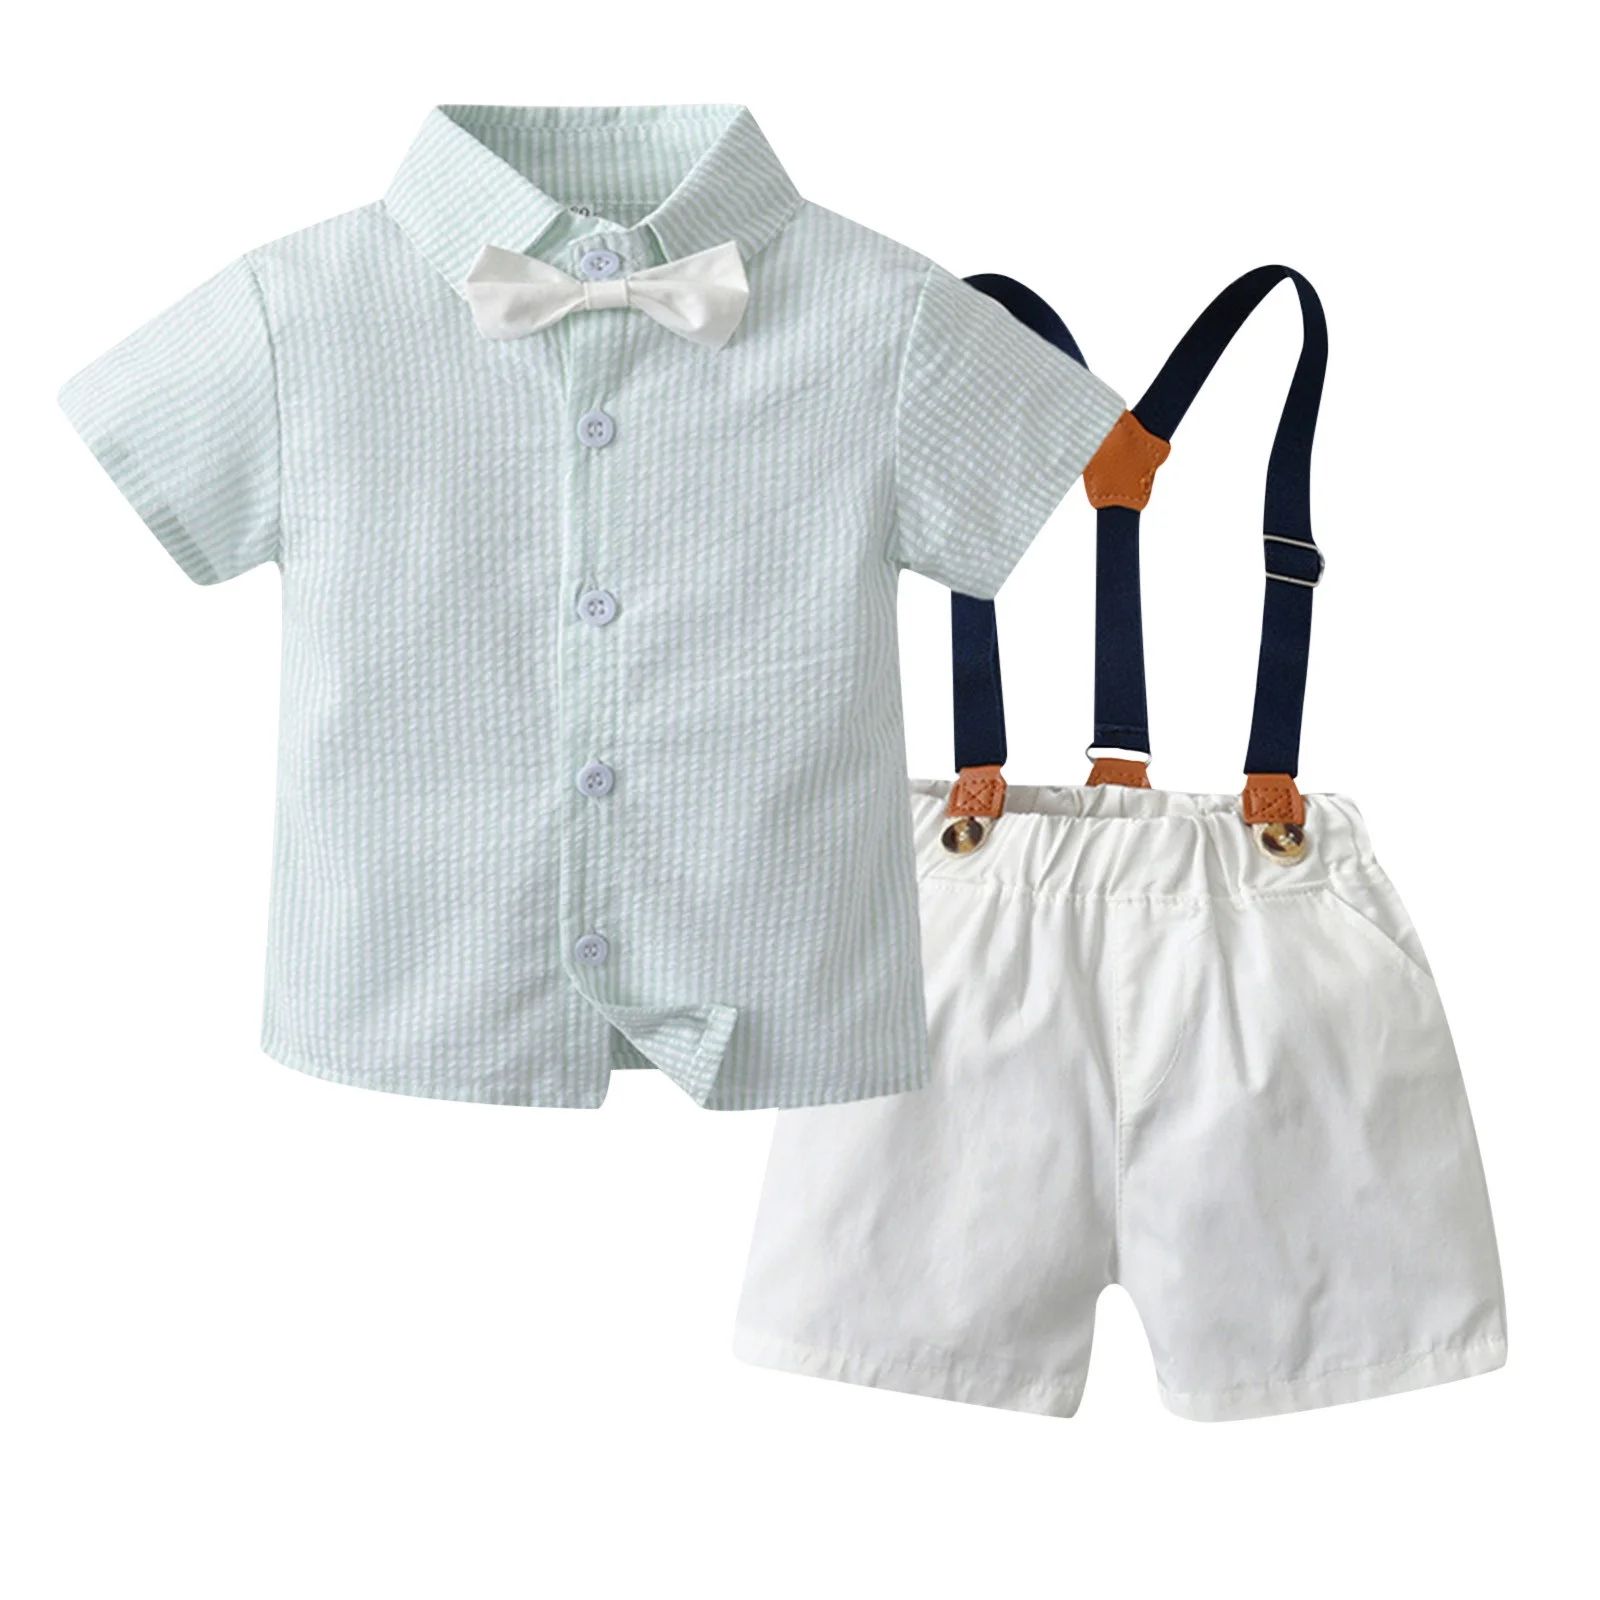 Boys Outfits Kids Gentleman Short Sleeve Striped Prints Shirt Tops Shorts Suspenders Baby Clothes... | Walmart (US)